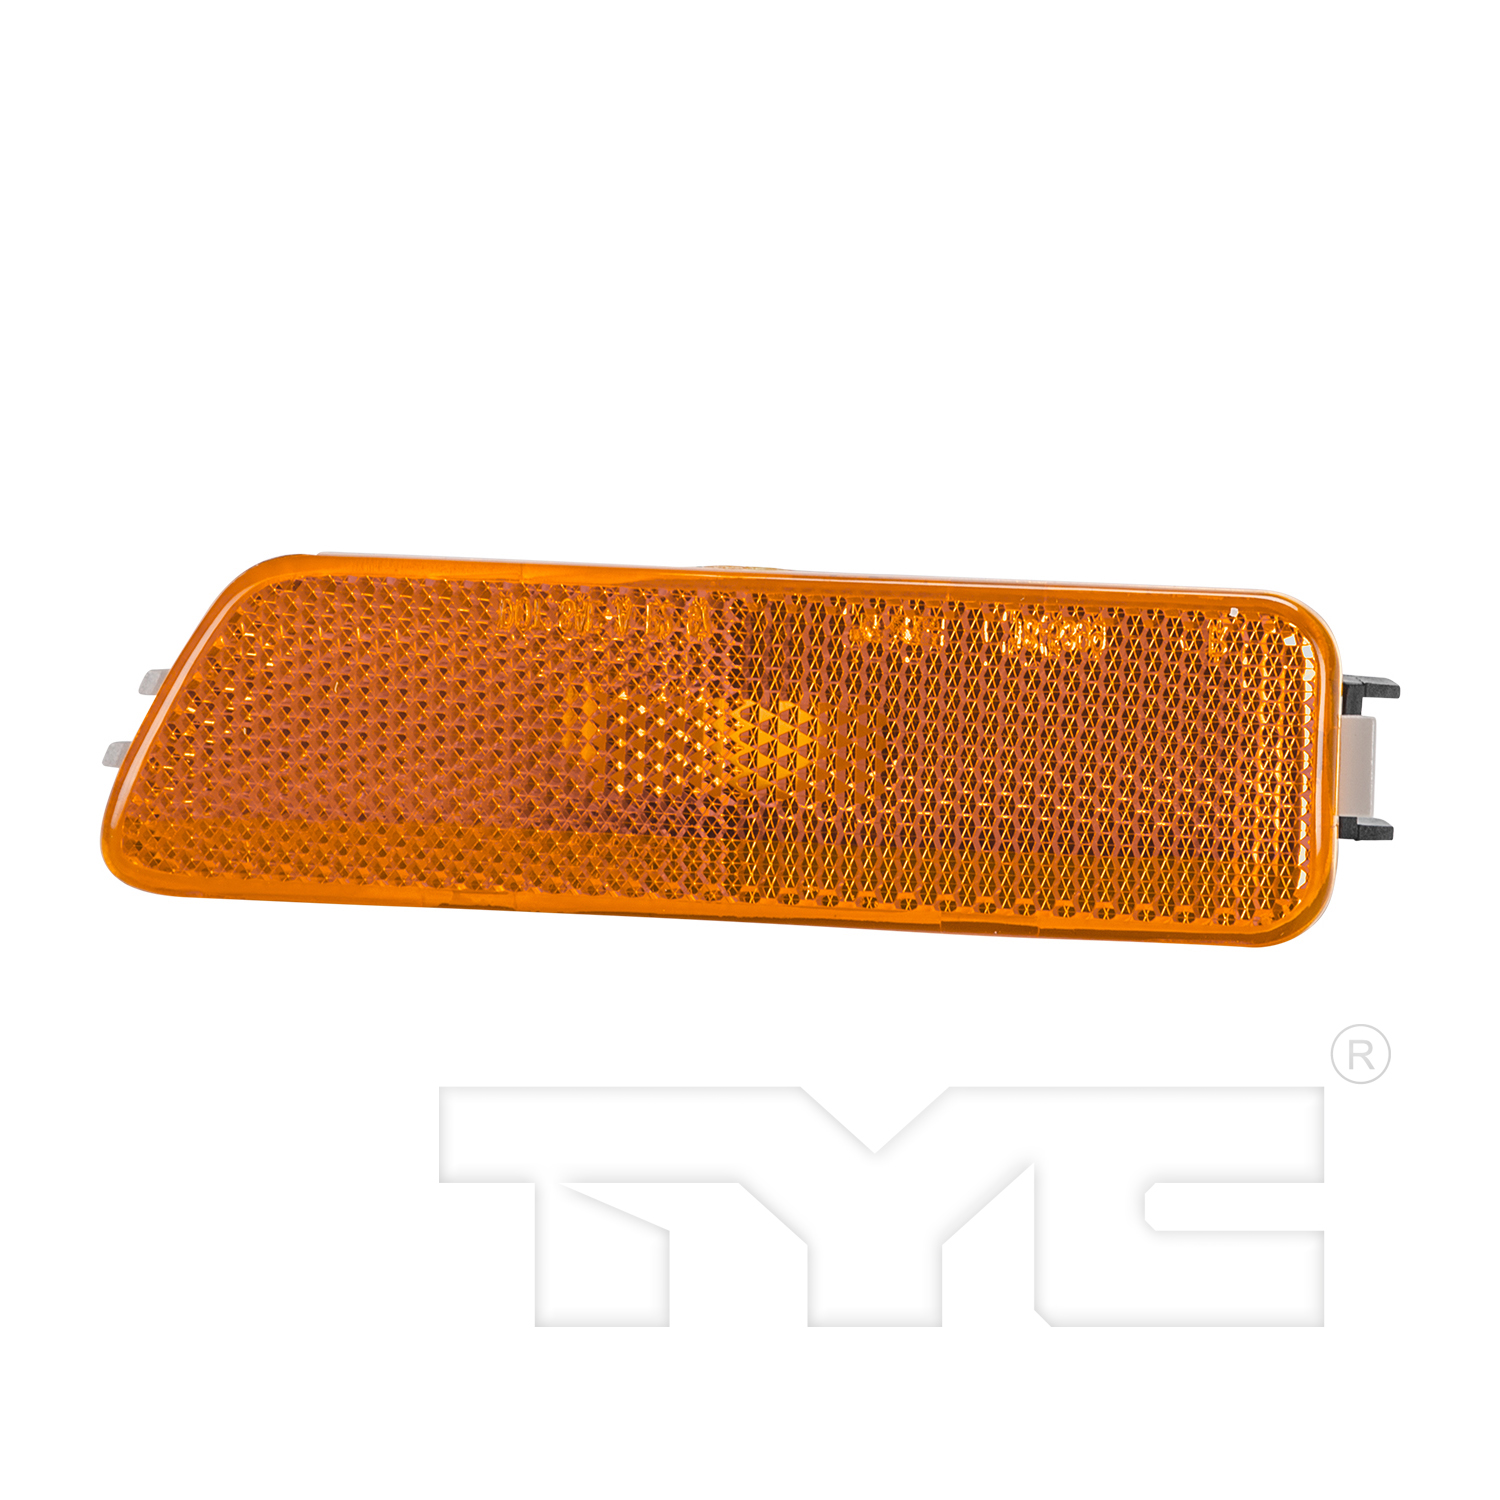 Aftermarket LAMPS for VOLKSWAGEN - CABRIO, CABRIO,99-02,LT Front marker lamp assy